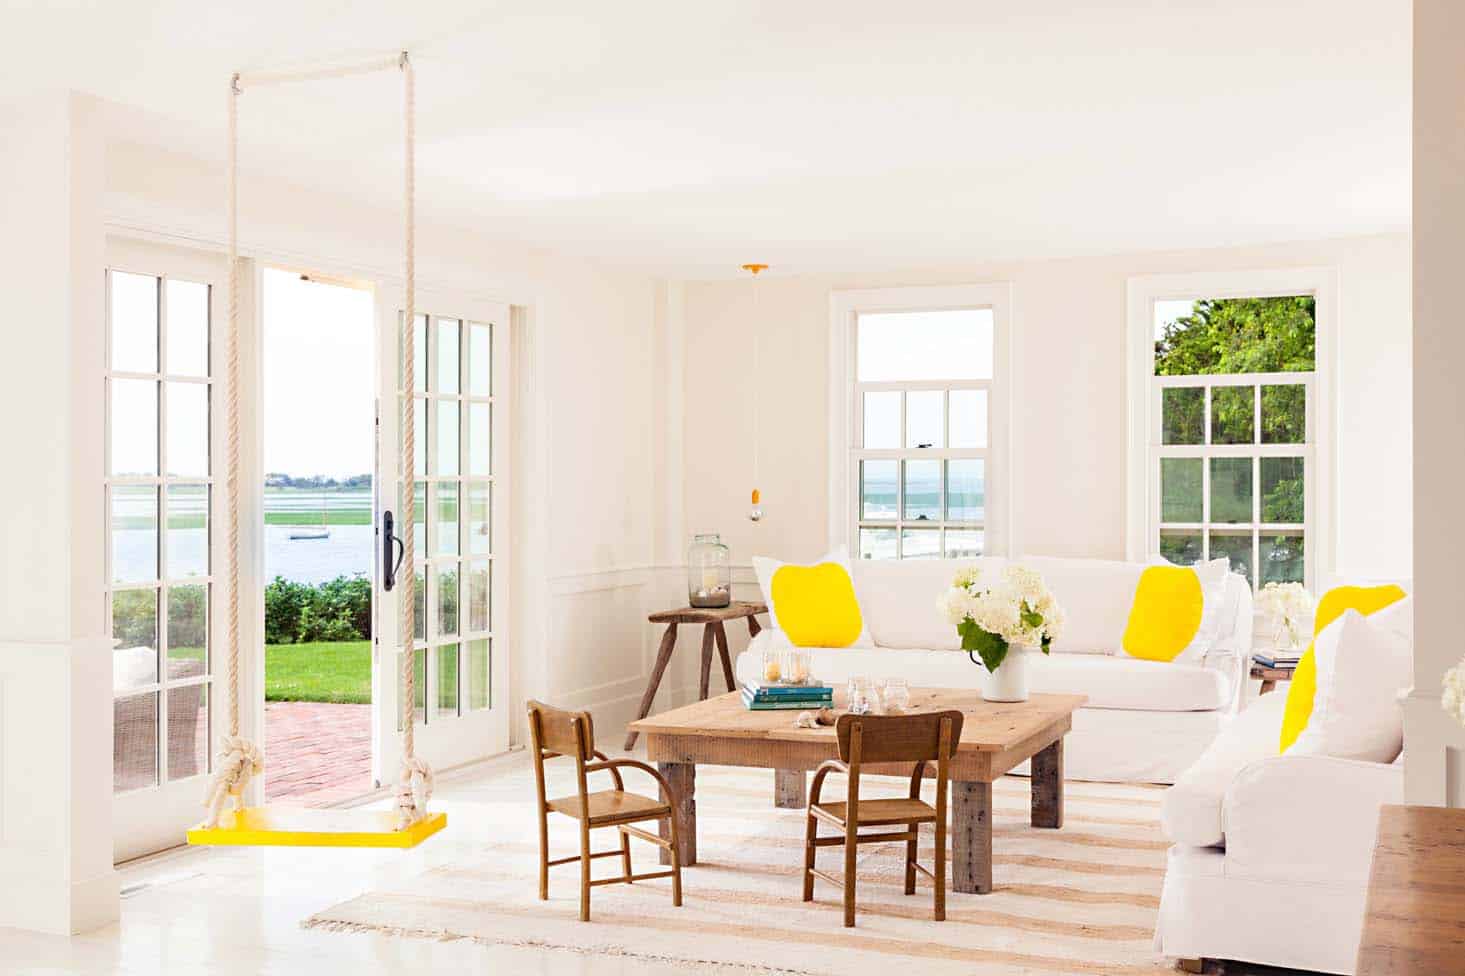 Cape Cod-style cottage radiates with pops of sunshine yellow